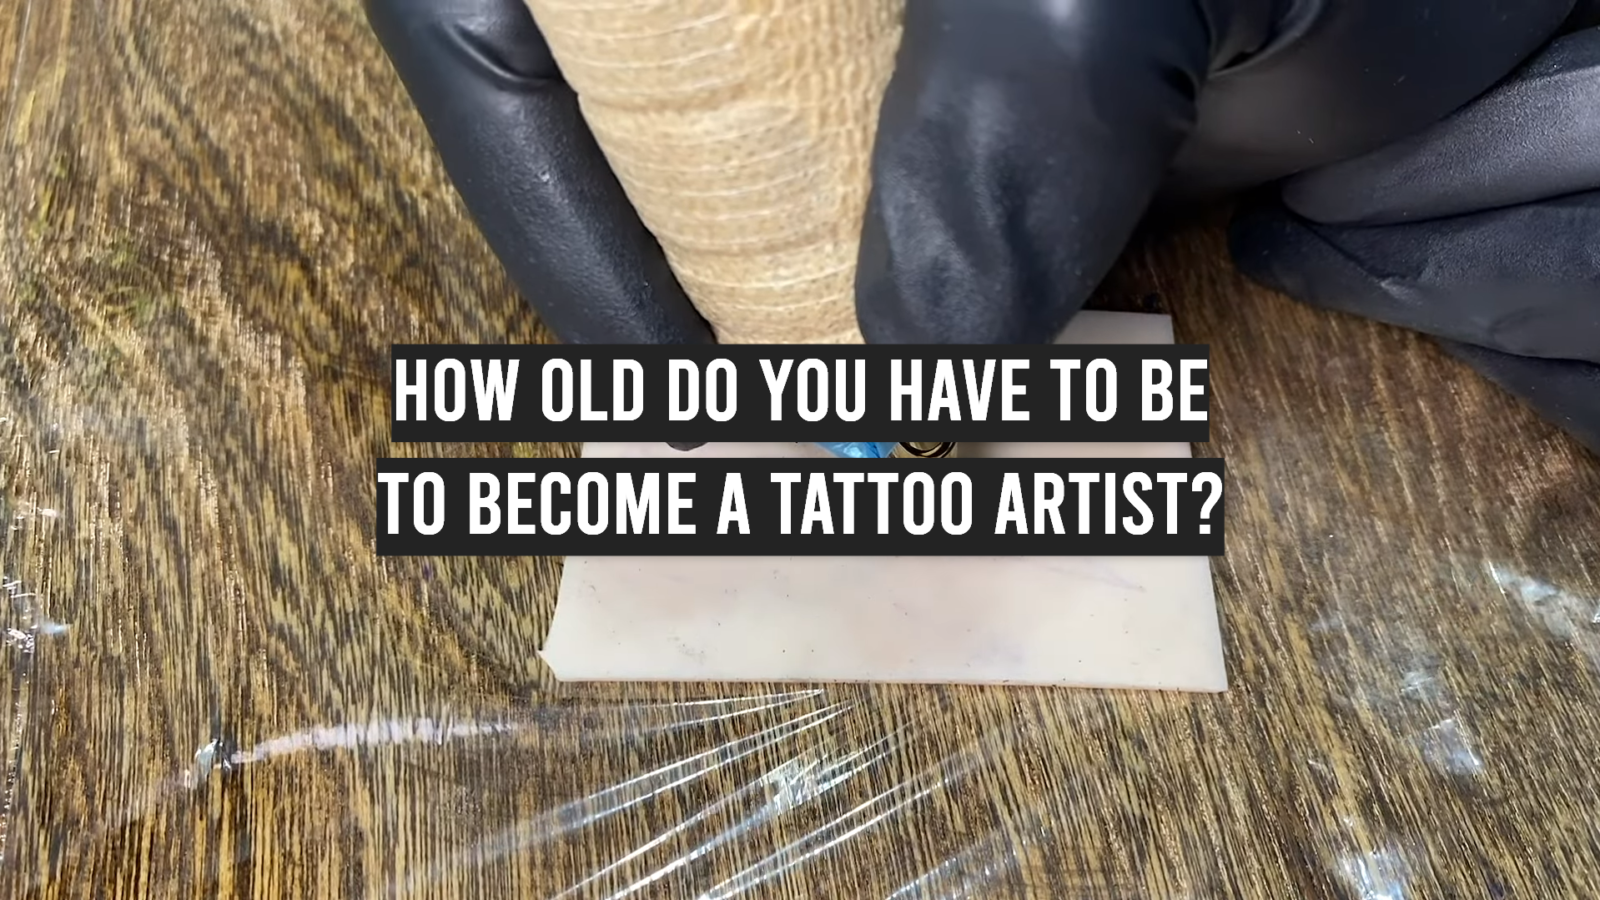 How Old Do You Have to Be to Become a Tattoo Artist?